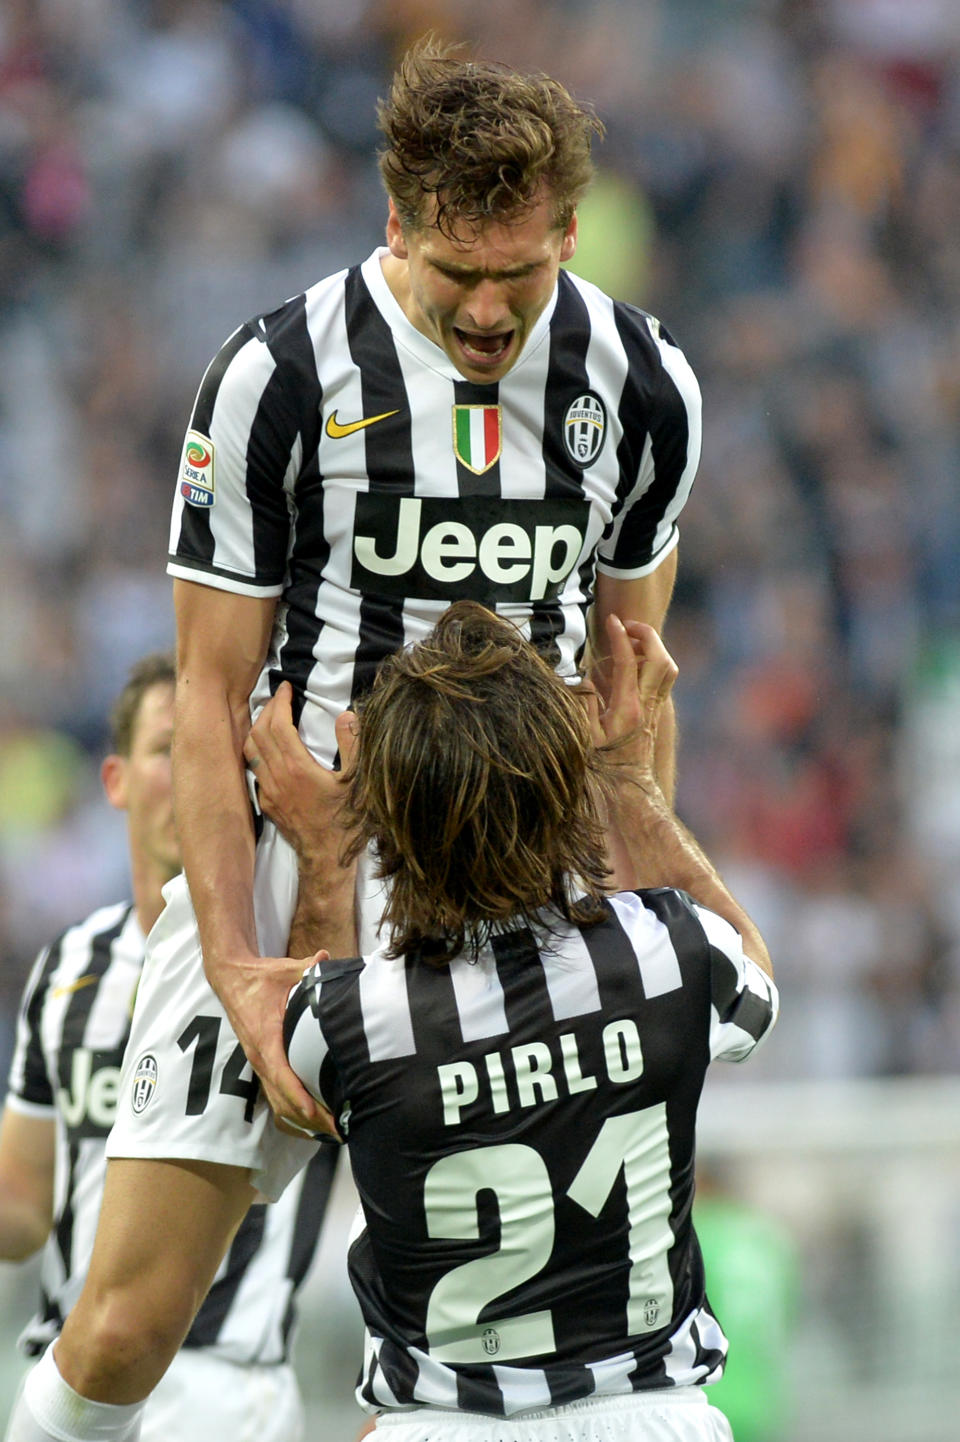 Juventus forward Fernando Llorente, of Spain, celebrates after scoring with teammates Andrea Pirlo during a Serie A soccer match between Juventus and Livorno at the Juventus stadium, in Turin, Italy, Monday, April 7, 2014. (AP Photo/Massimo Pinca)